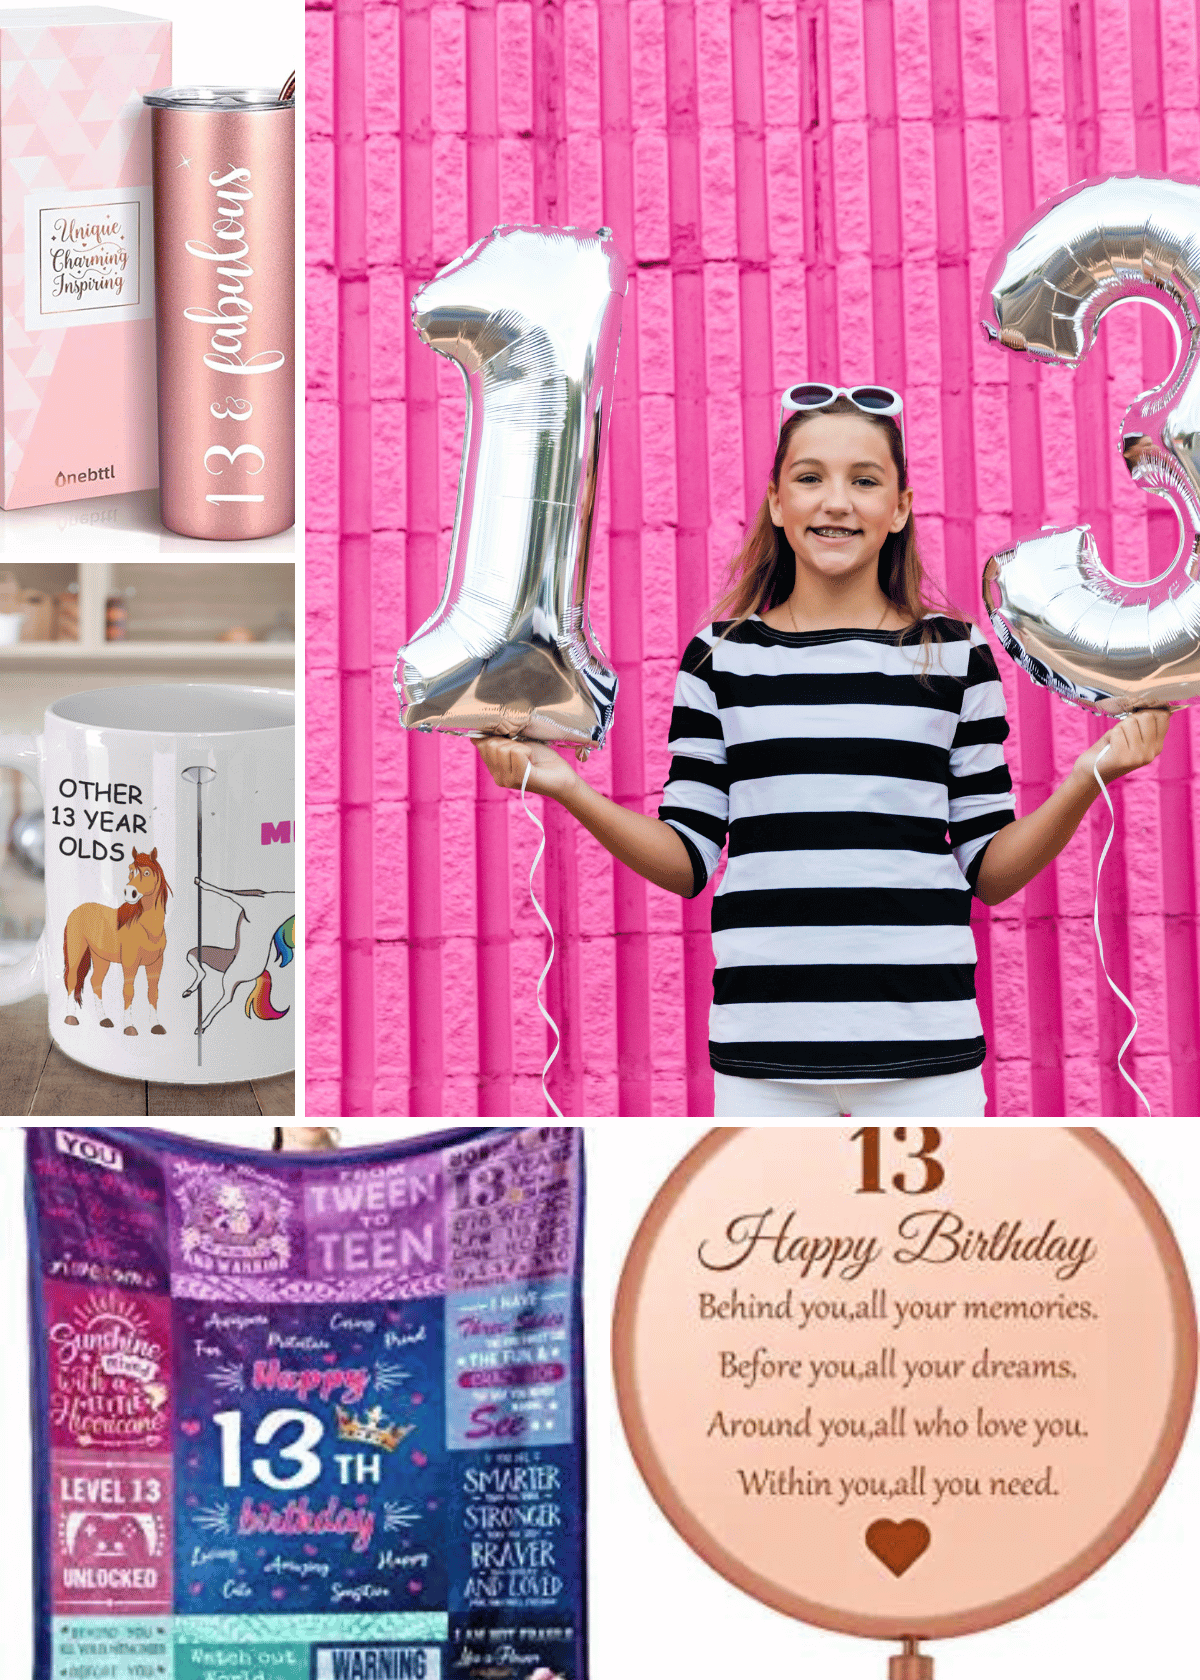 Top 5 Best Birthday Gifts for 13-Year-Old Girls Available on Amazon